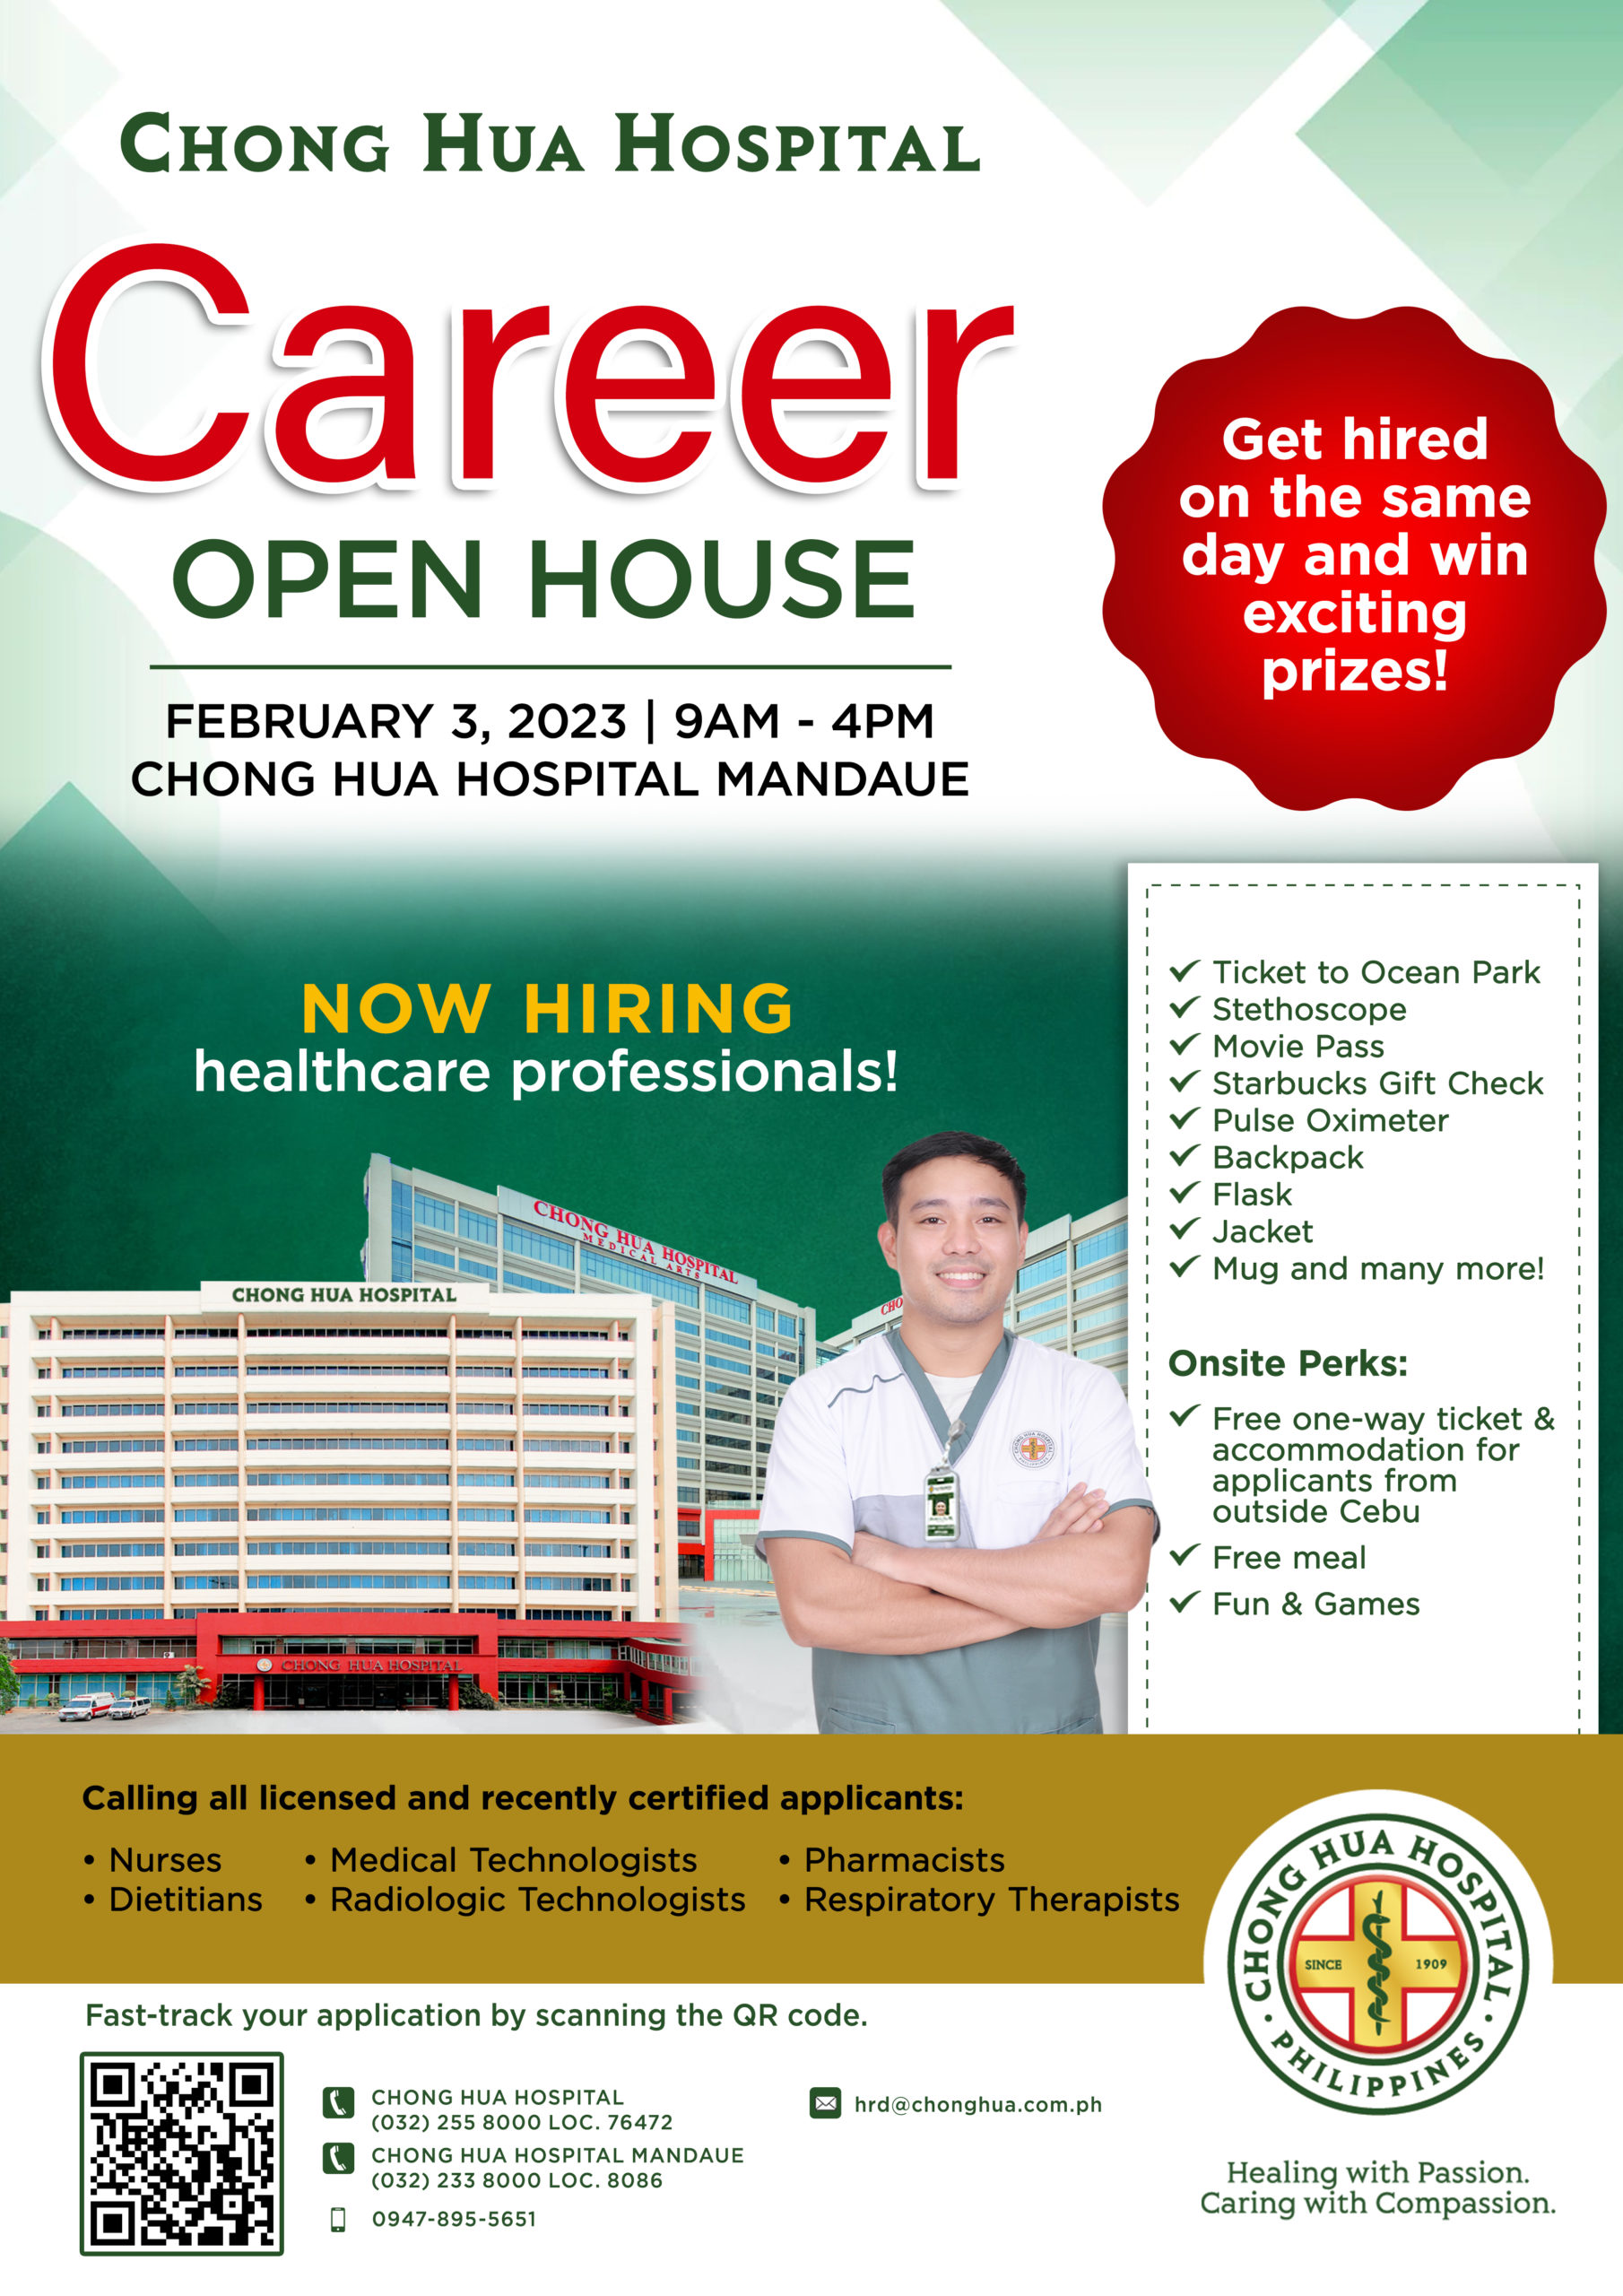 Chong Hua Hospital Career Open House Poster Copy Scaled 